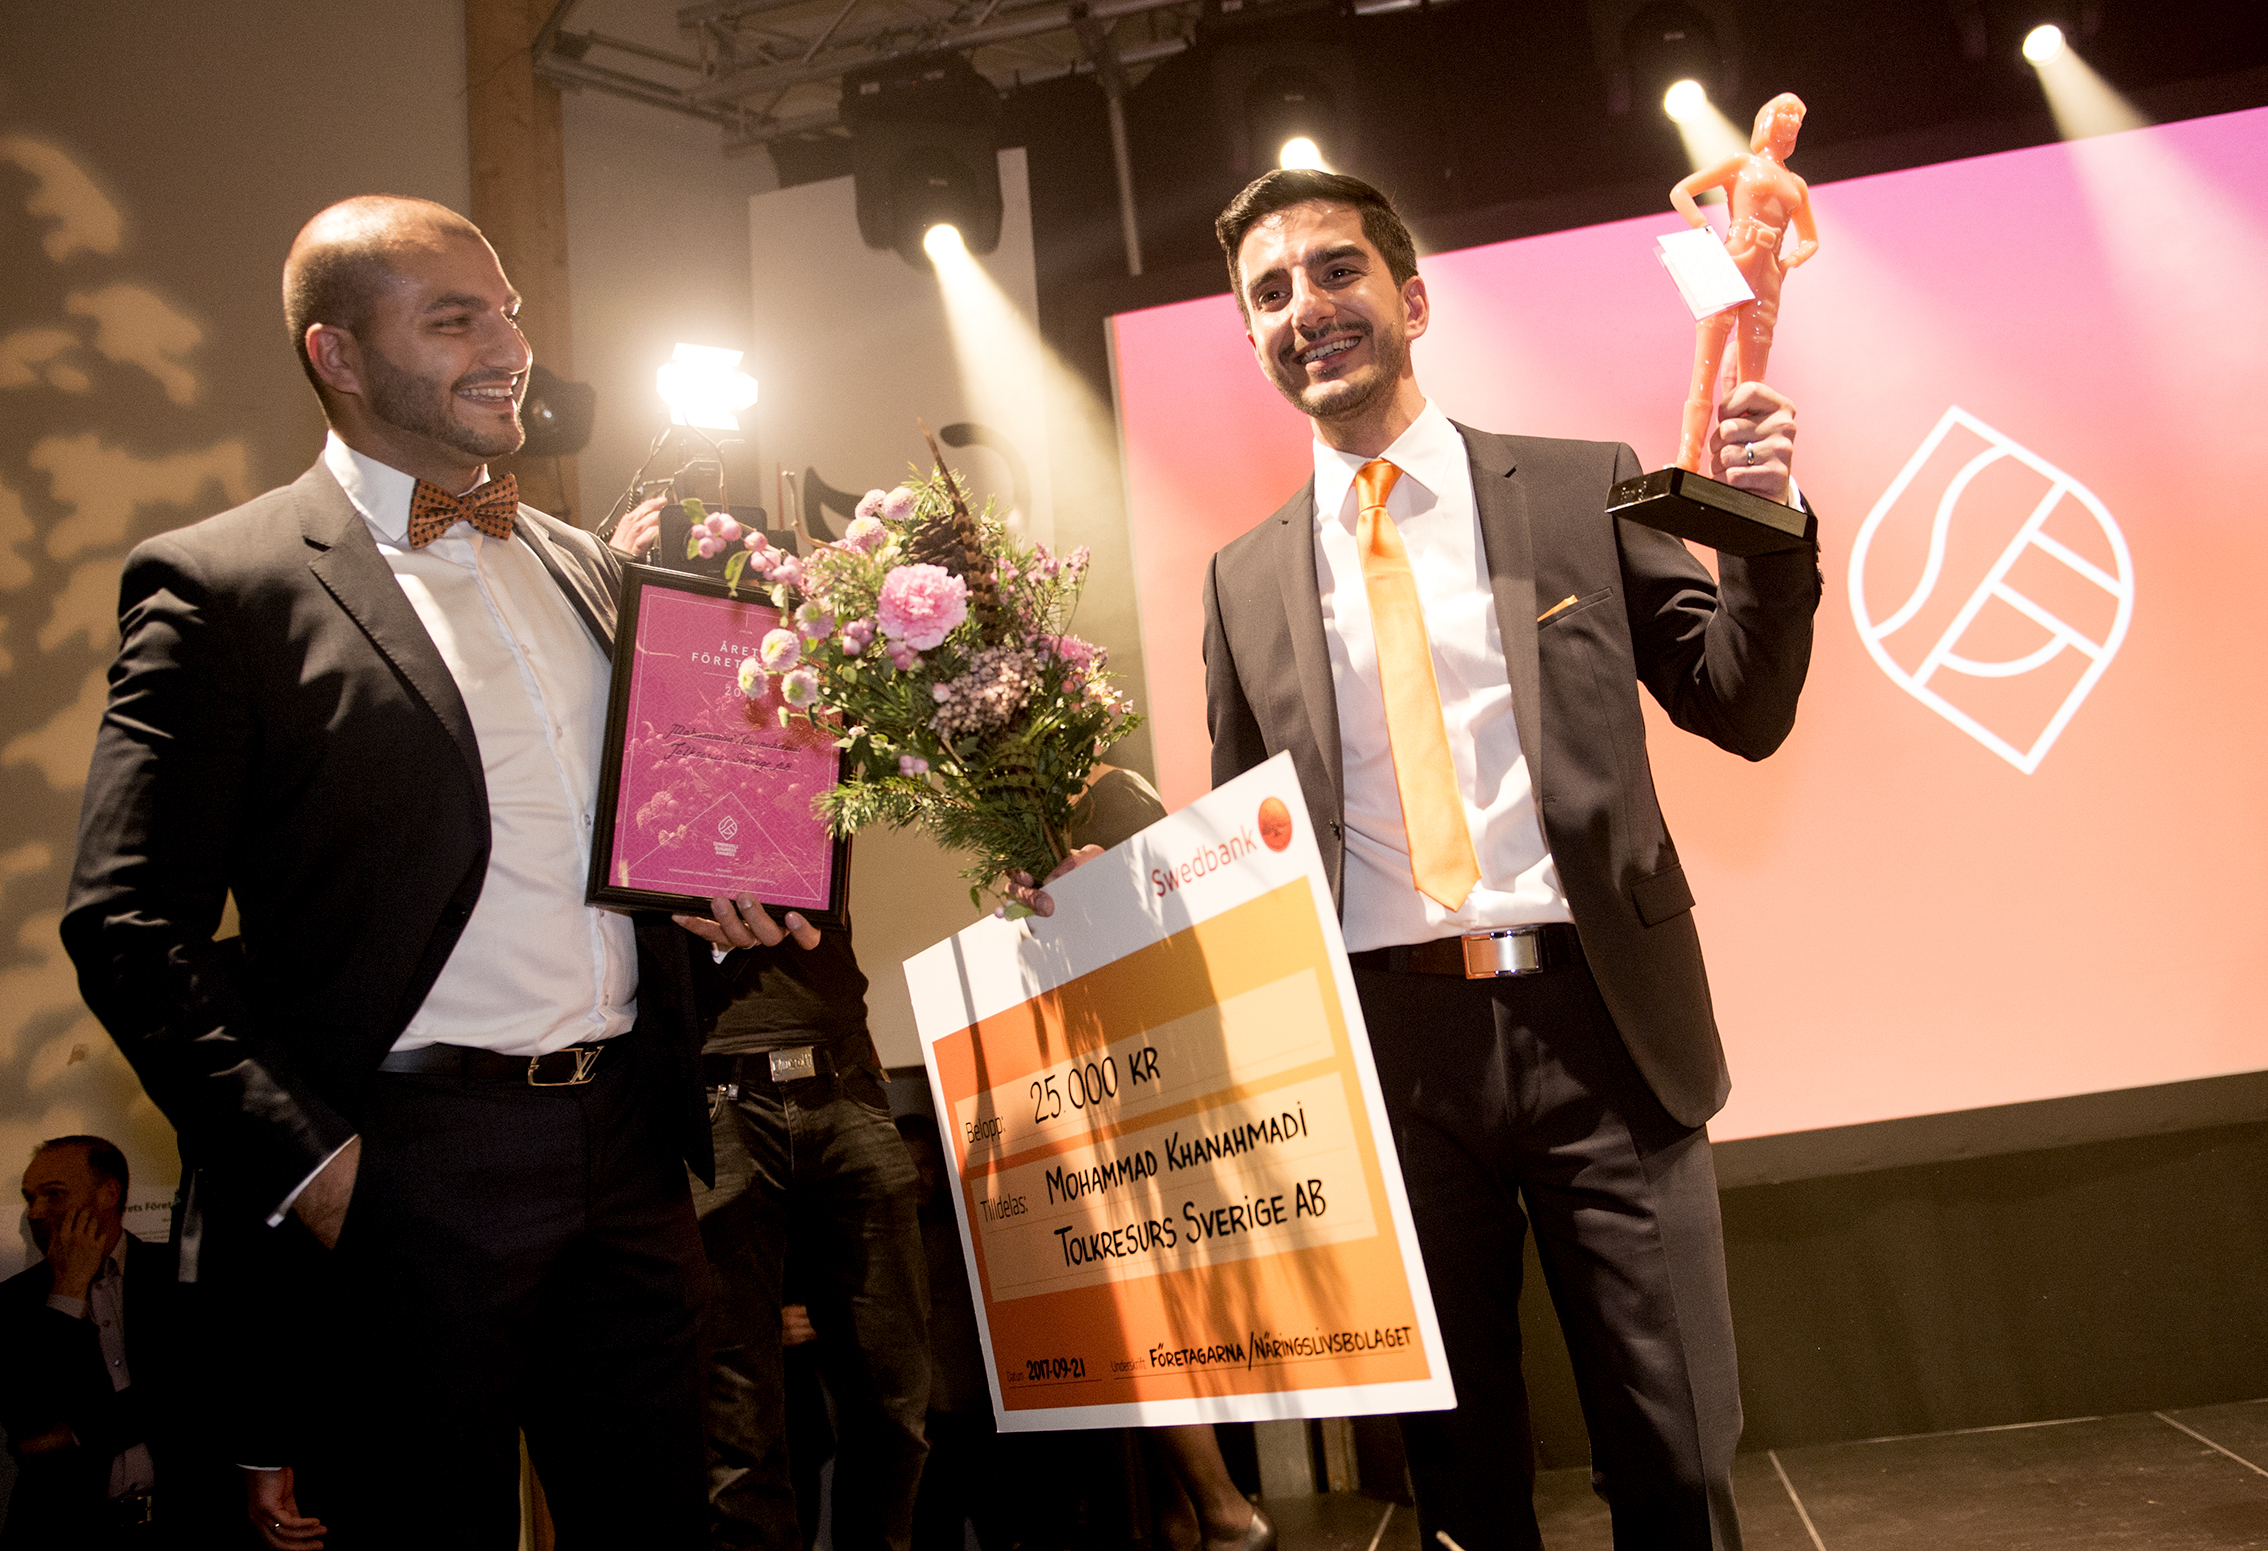 The success story continues. Today, brothers Hamid and Mohammad Khanahmadi are the entrepreneurs of the year in Sweden.